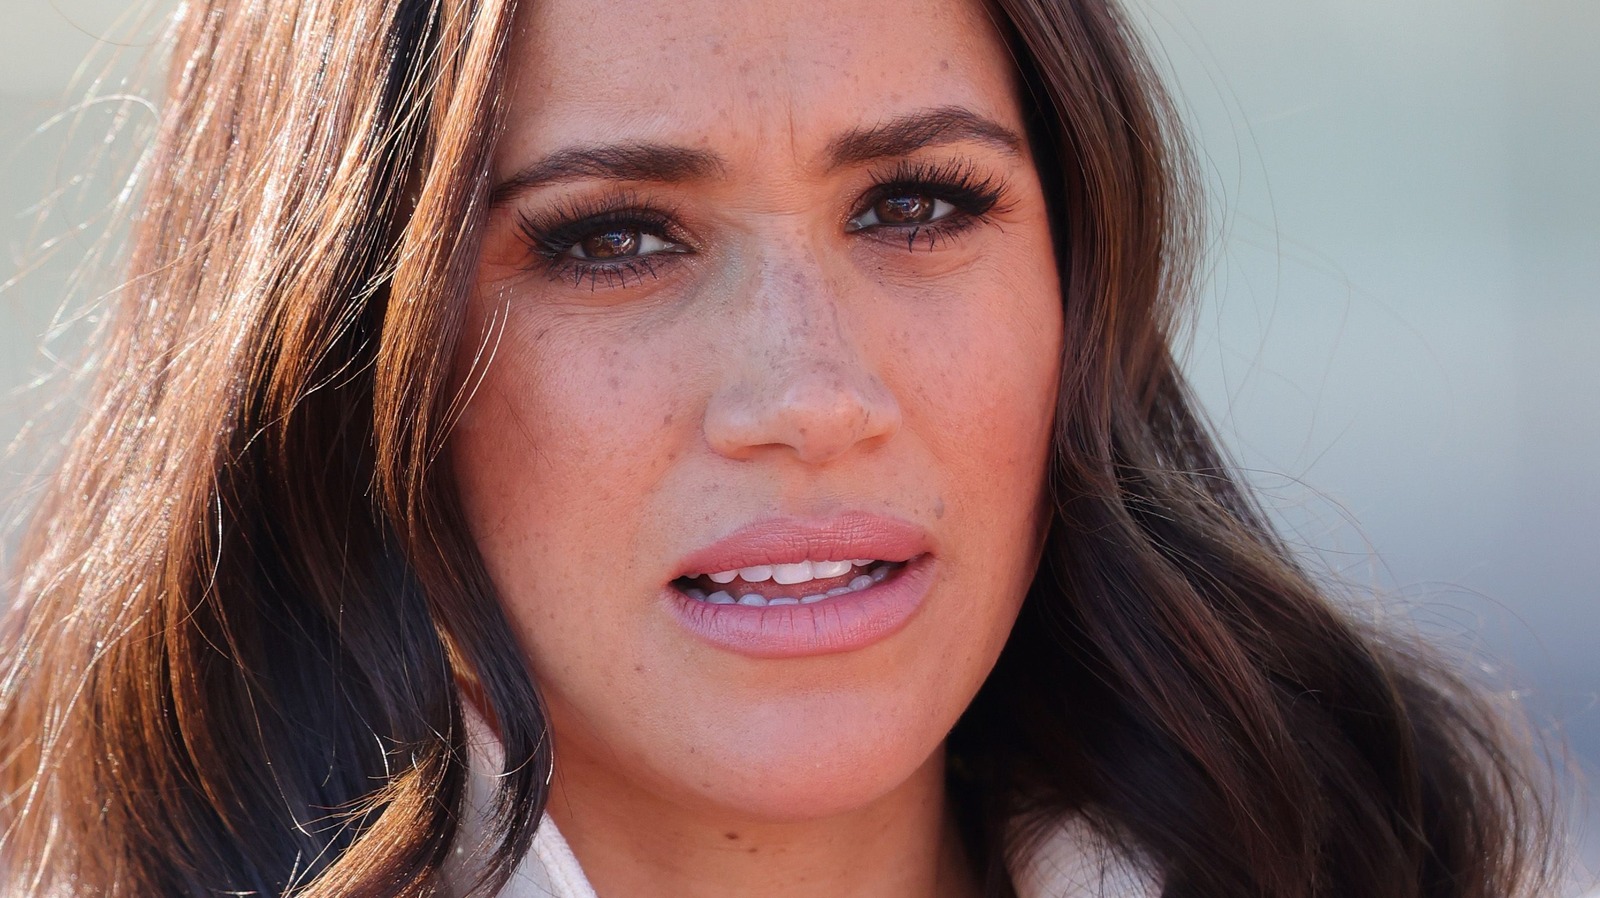 What We Know About Meghan Markle's Father Reportedly Requiring Hospitalization